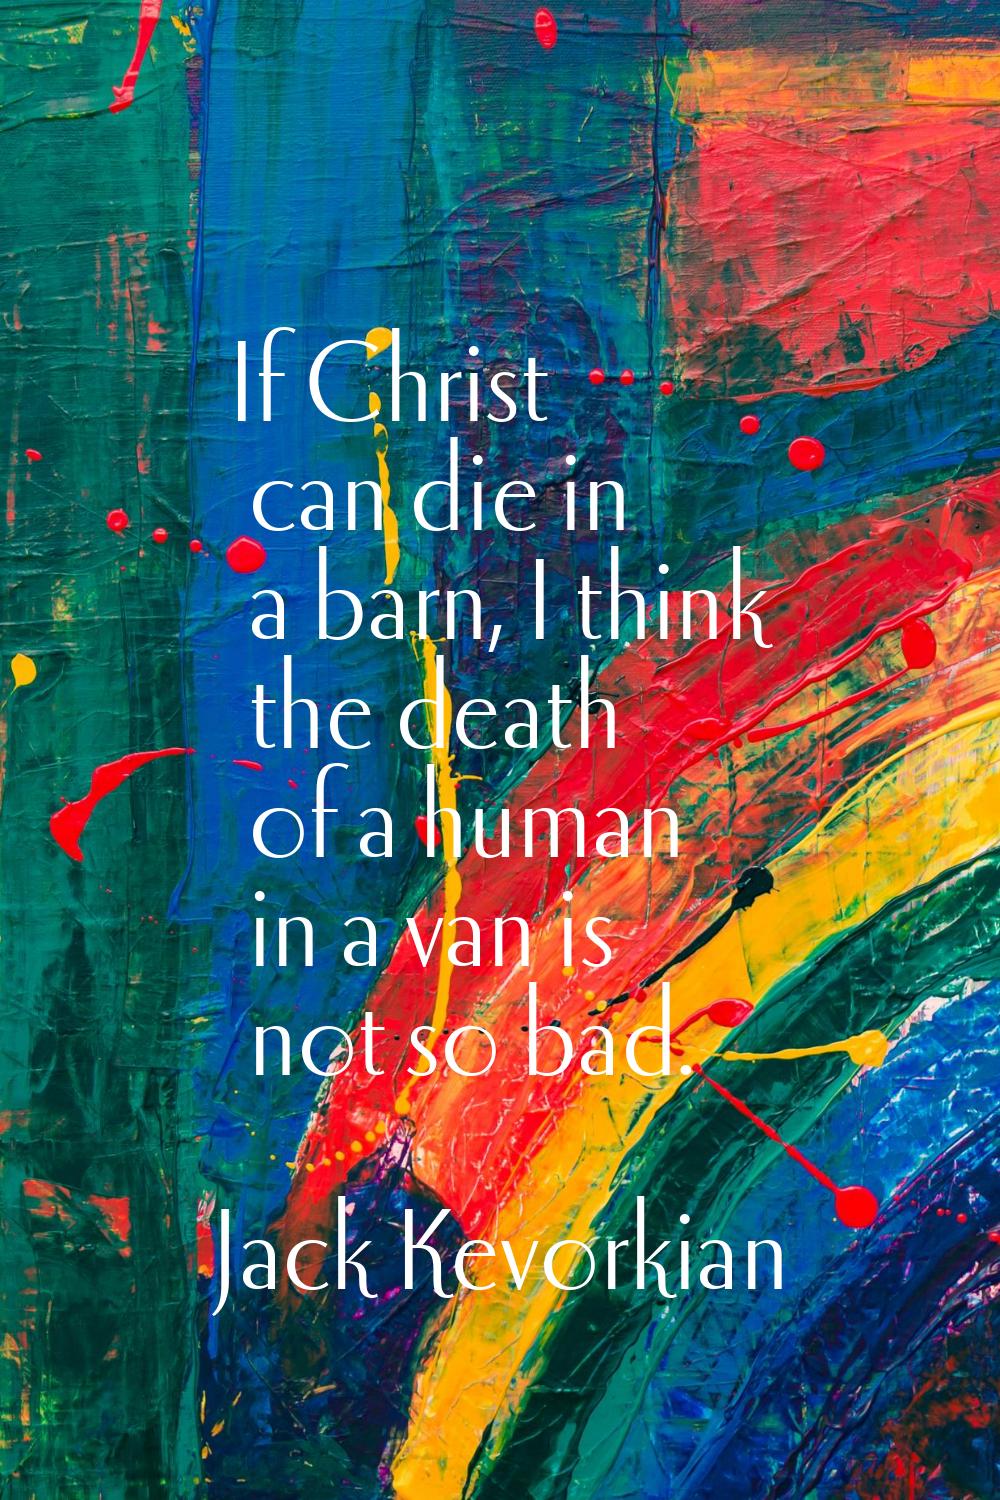 If Christ can die in a barn, I think the death of a human in a van is not so bad.